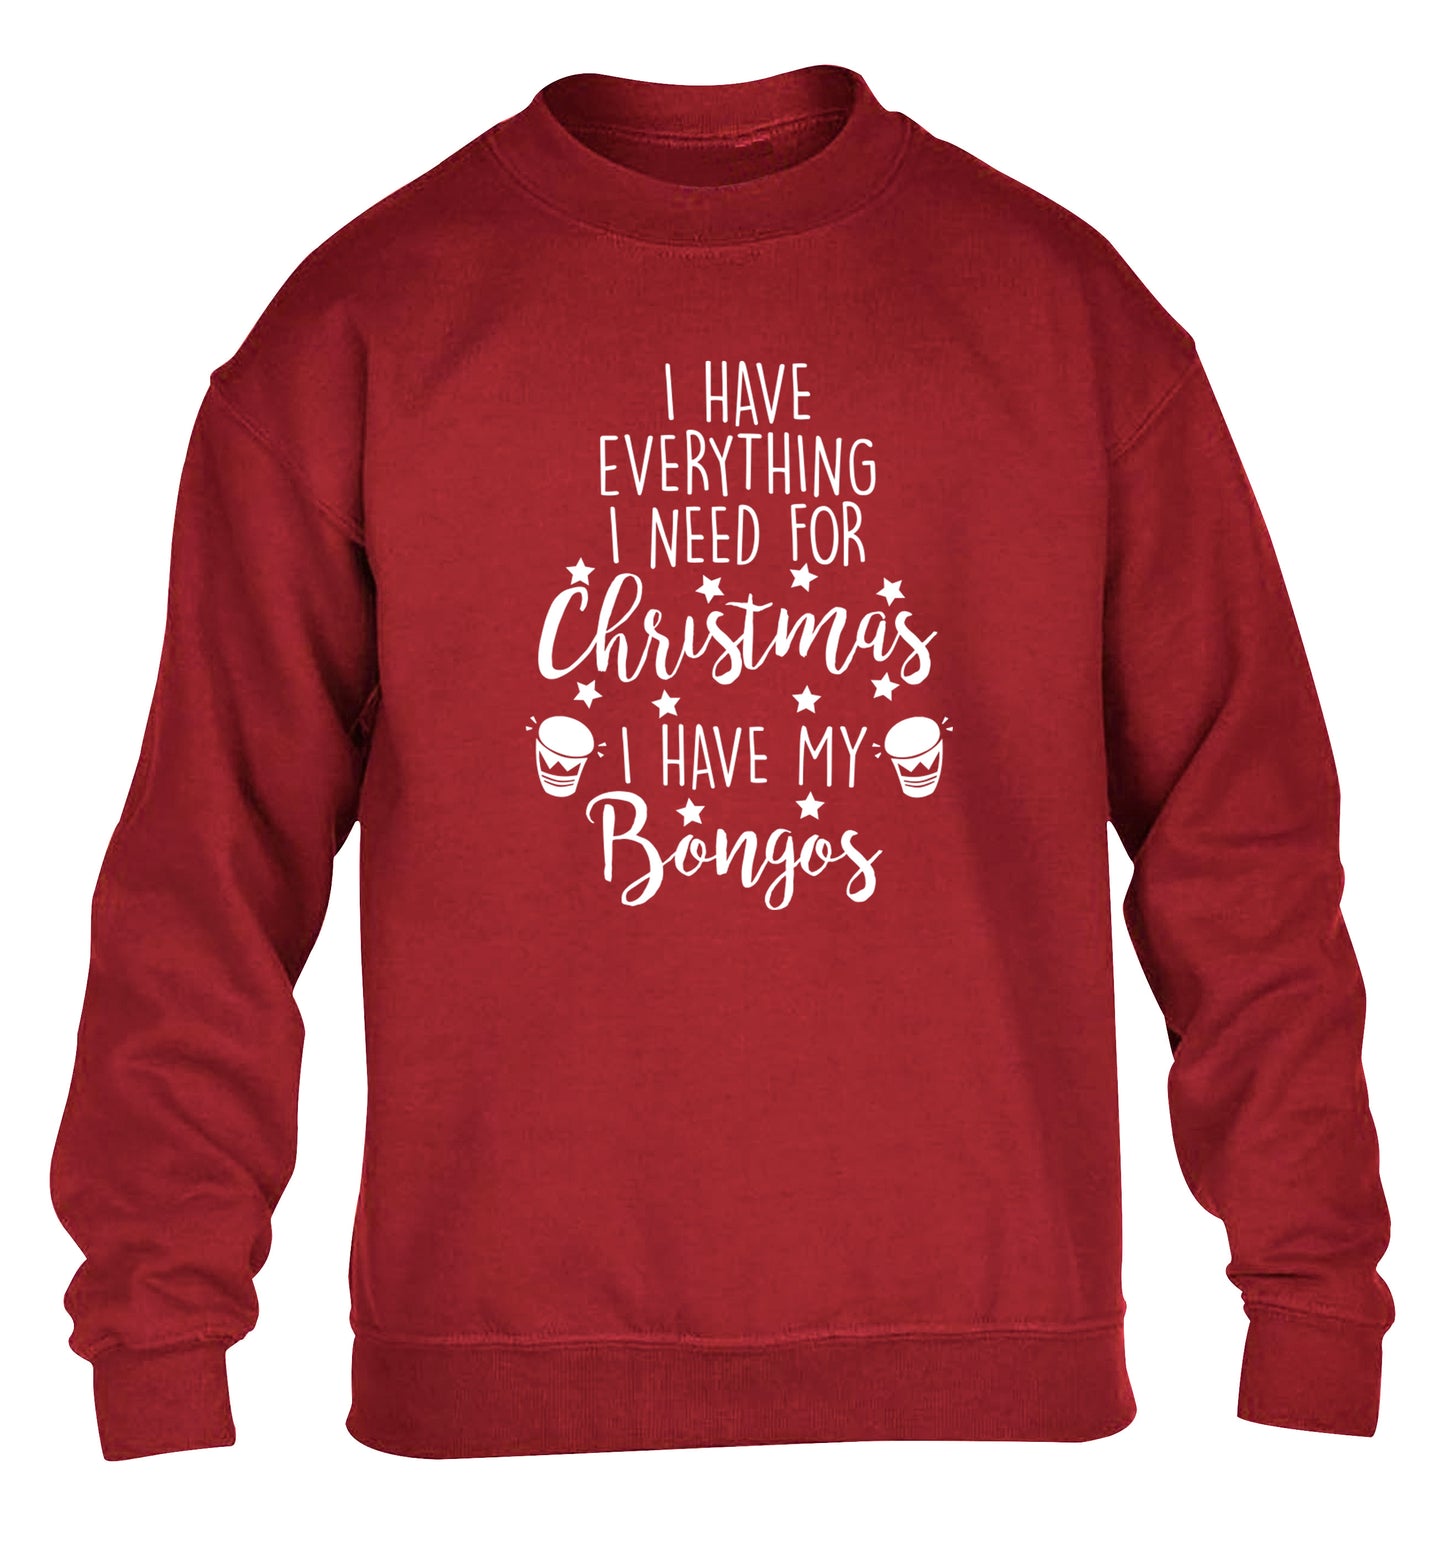 I have everything I need for Christmas I have my bongos! children's grey sweater 12-14 Years